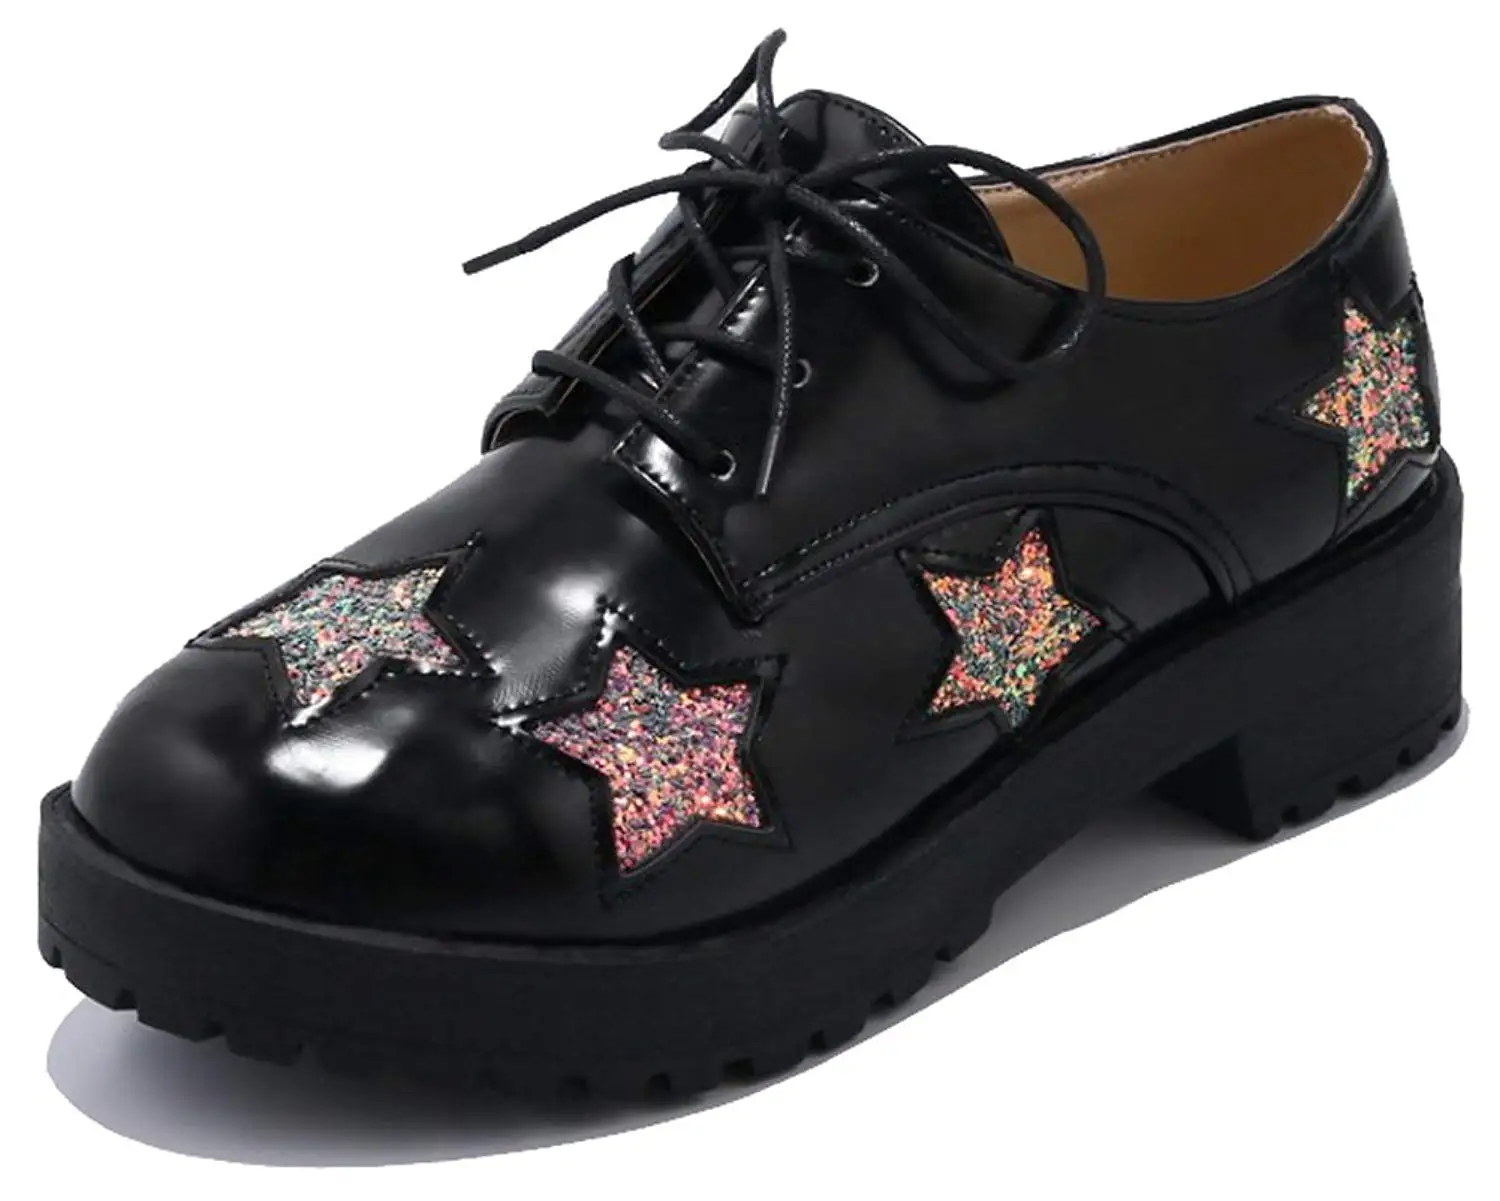 Buy HiEase Womens Glitter Stars Sequins Low Heels Oxfords Shoes Girls  School Uniform Dress Shoes Size 4-11 (4, Black) in Cheap Price on  Alibaba.com